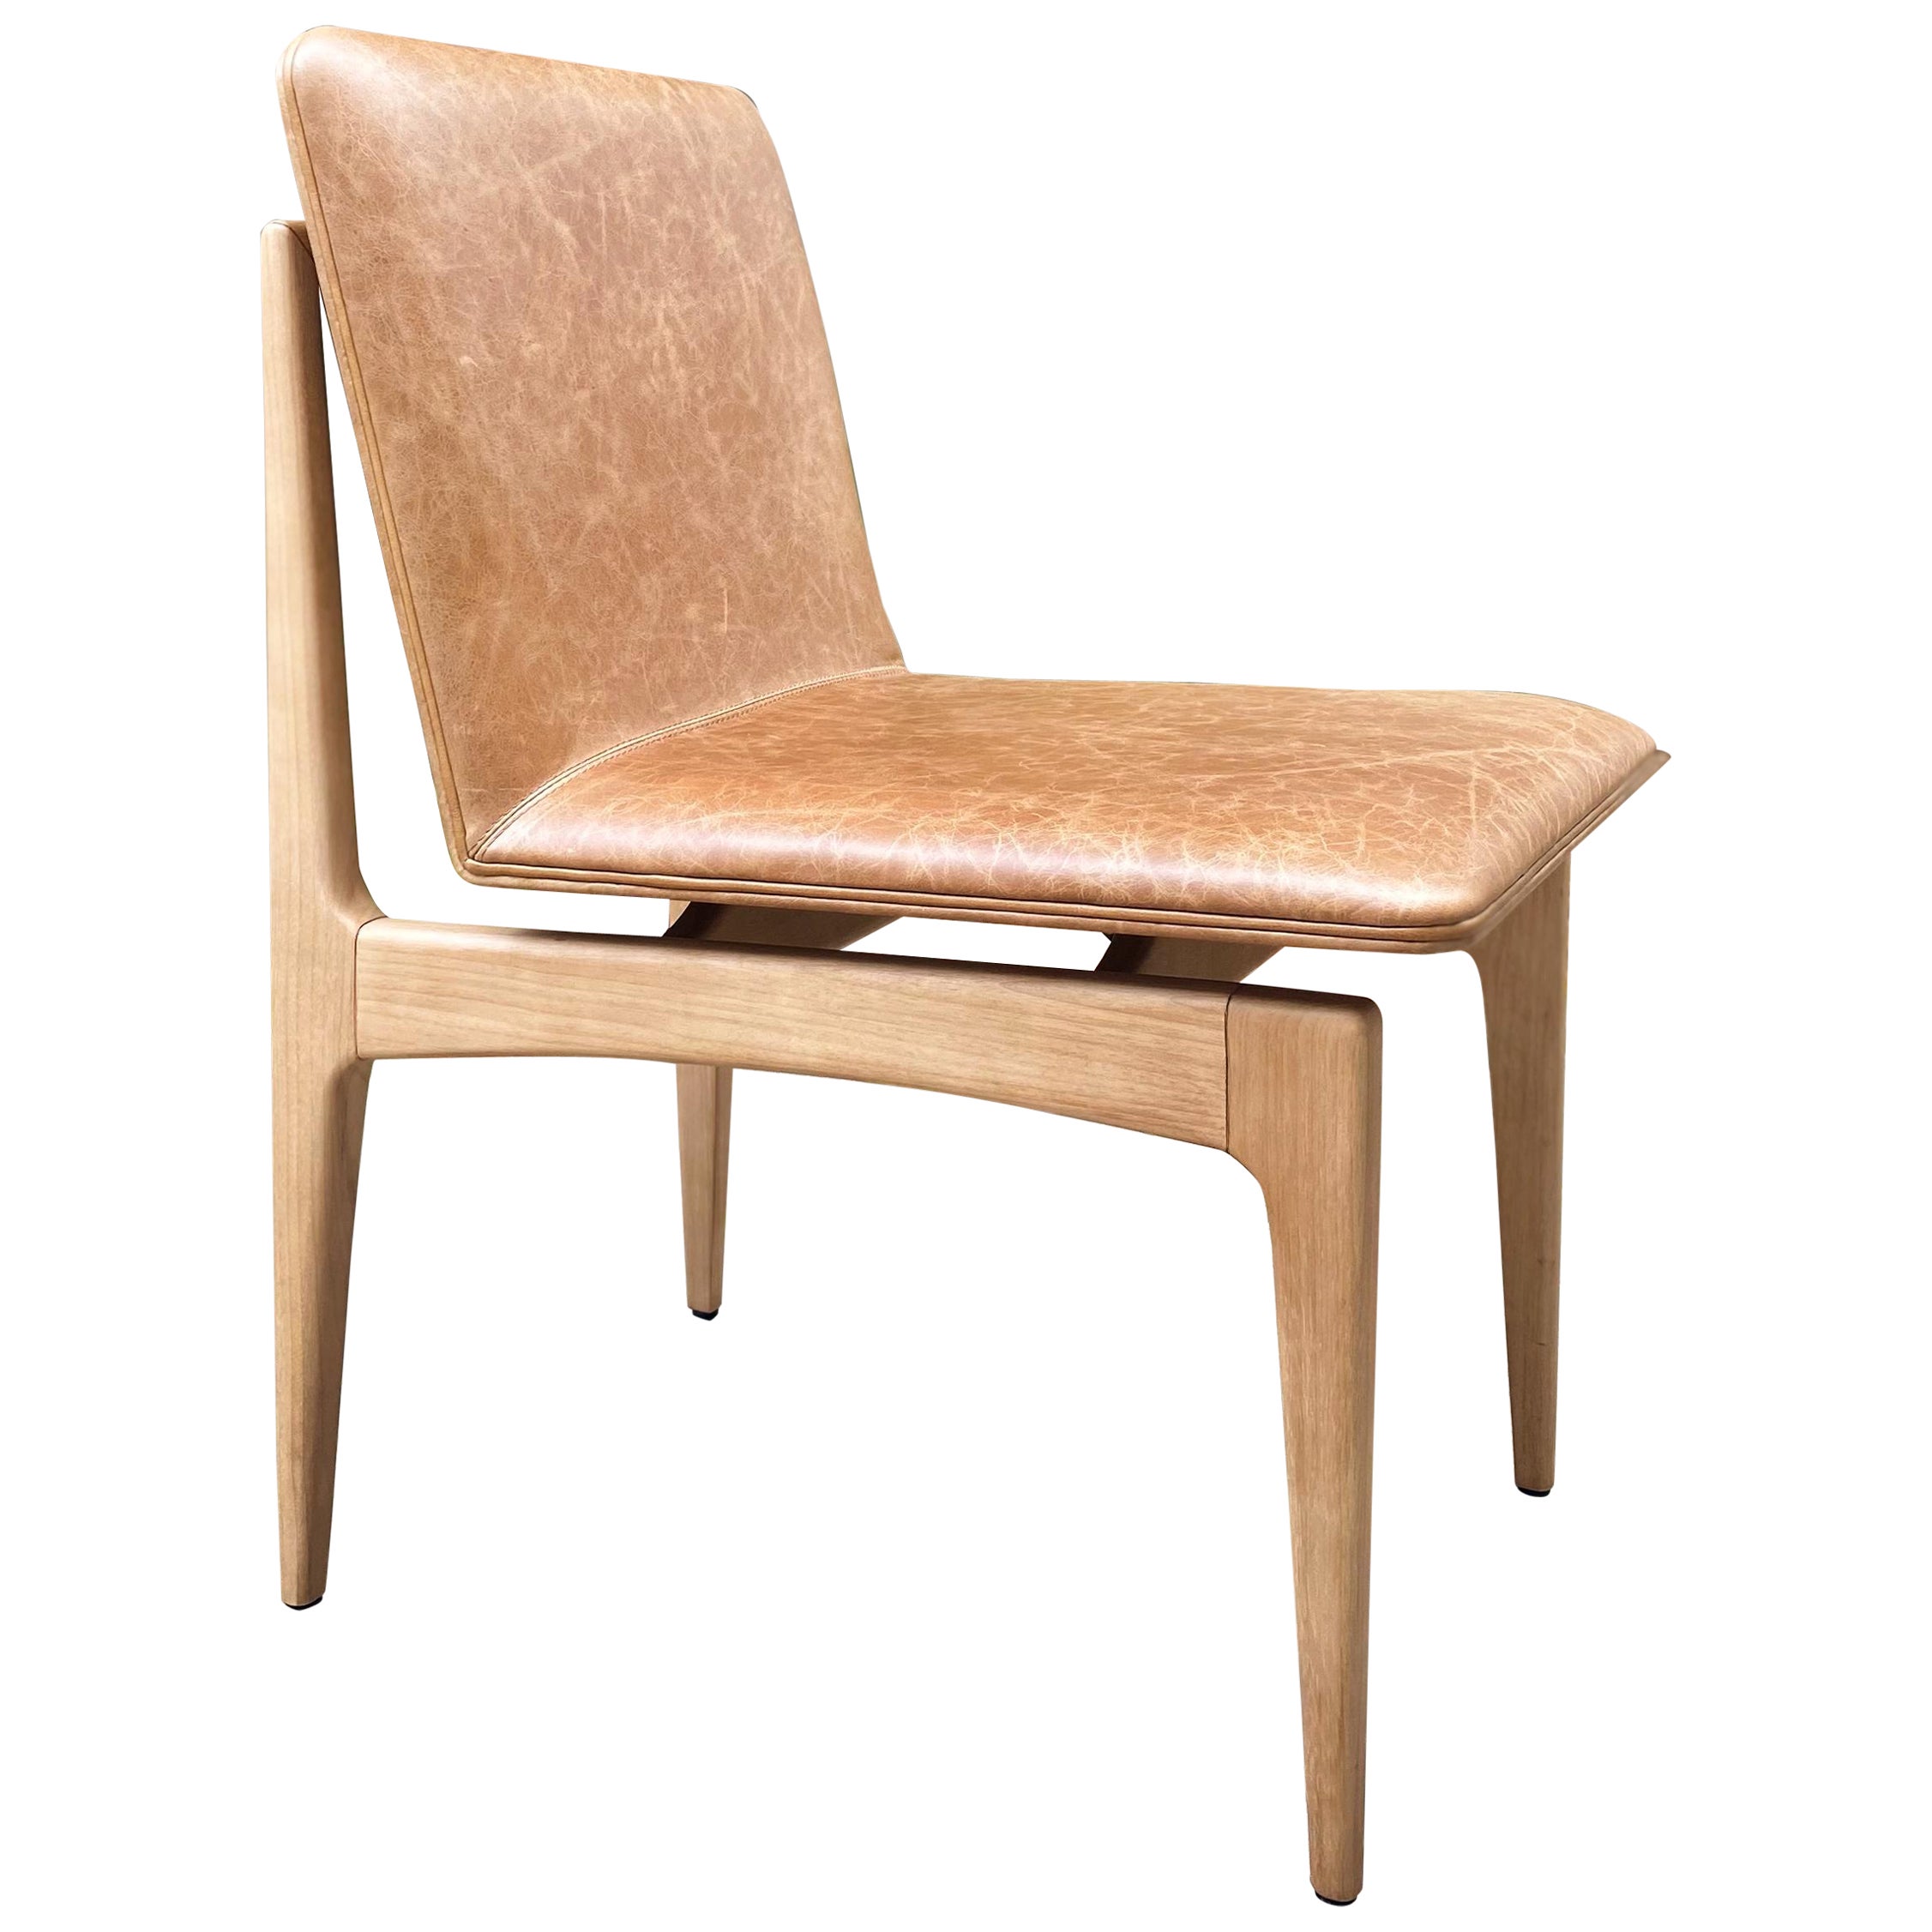 "Oscar" Minimalist Chair in Solid  Wood with Leather or Fabric For Sale